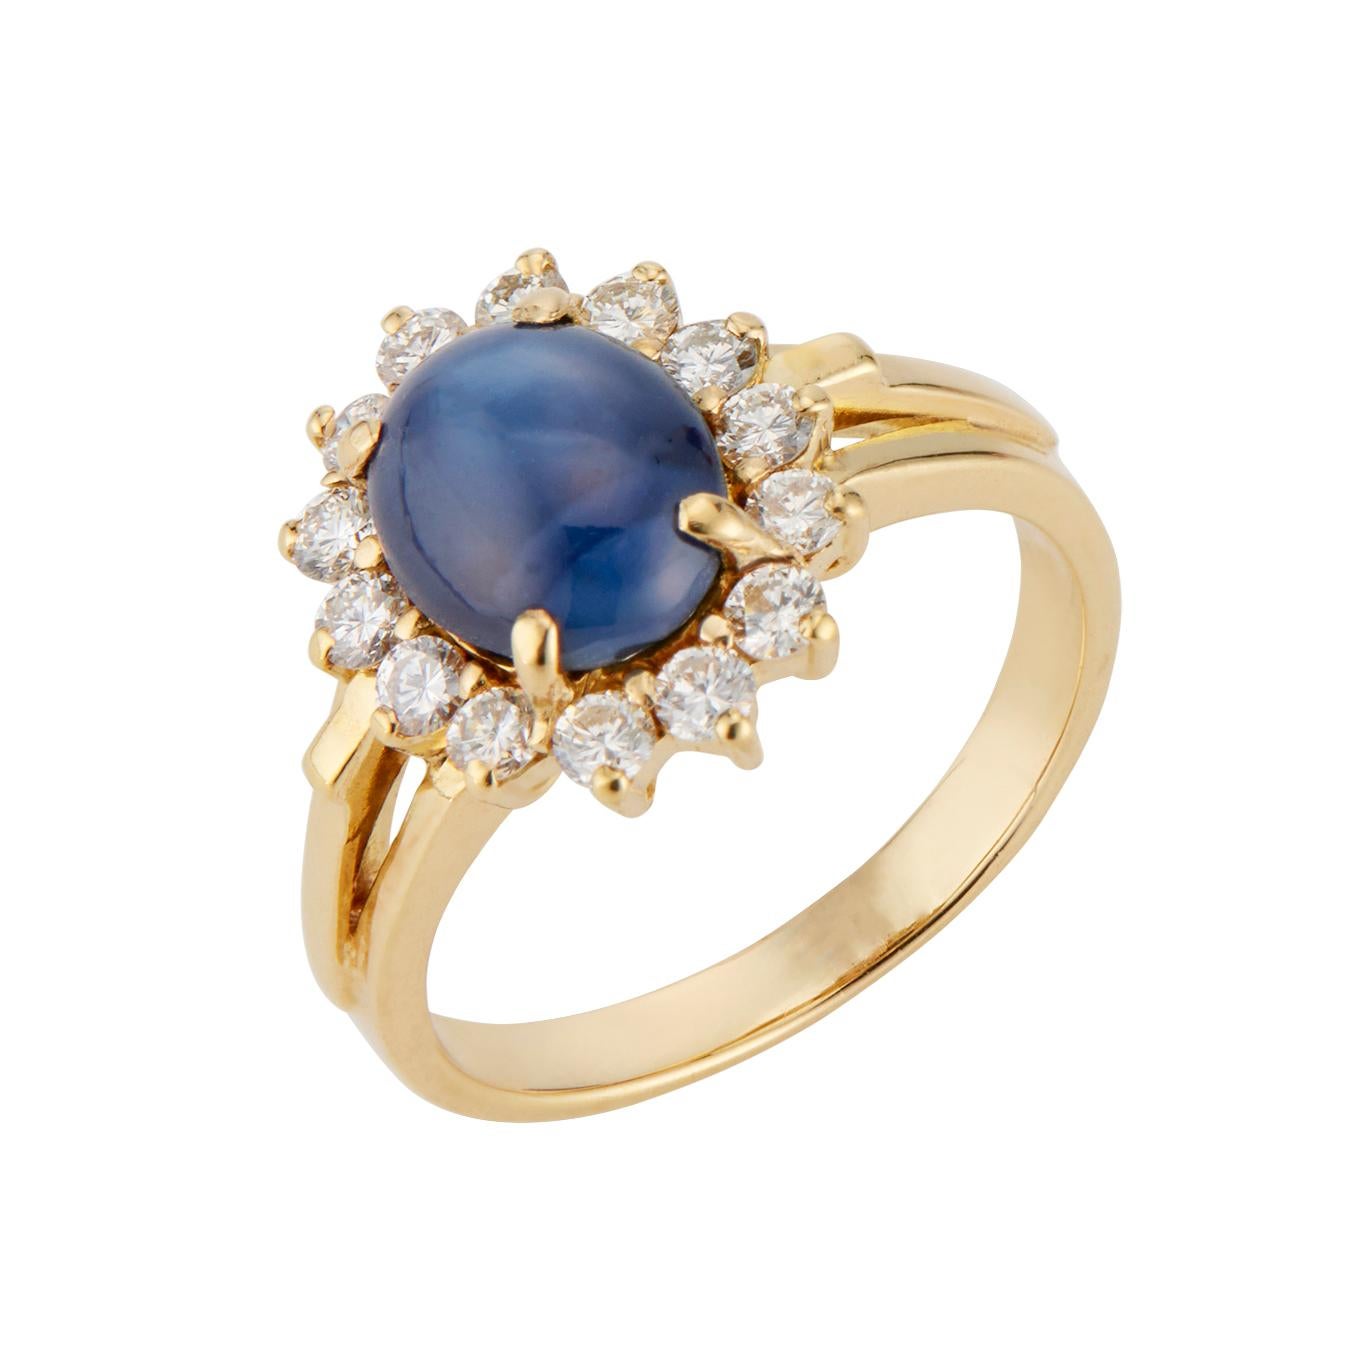 Sapphire and diamond engagement ring. GIA certified 2.34cts oval star sapphire with a halo of 14 round diamonds in a 18k yellow gold setting. Circa 1960's. 

1 oval cabochon blue Sapphire, approx. total weight 2.34cts, natural, no heat, GIA